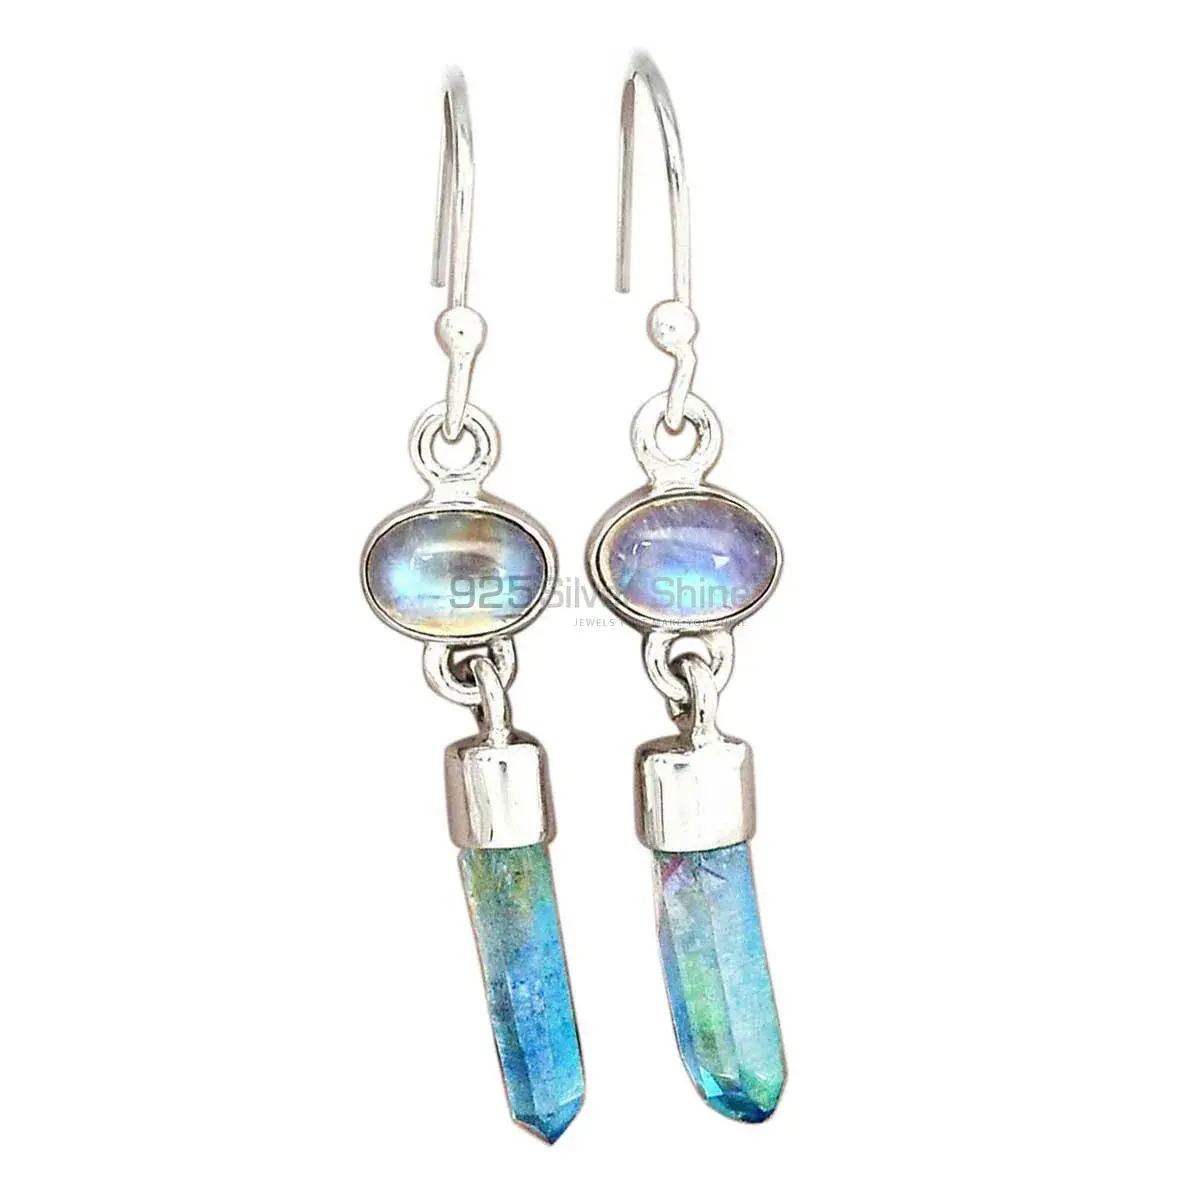 Affordable 925 Sterling Silver Handmade Earrings Suppliers In Rainbow-Apatite Gemstone Jewelry 925SE2707_2